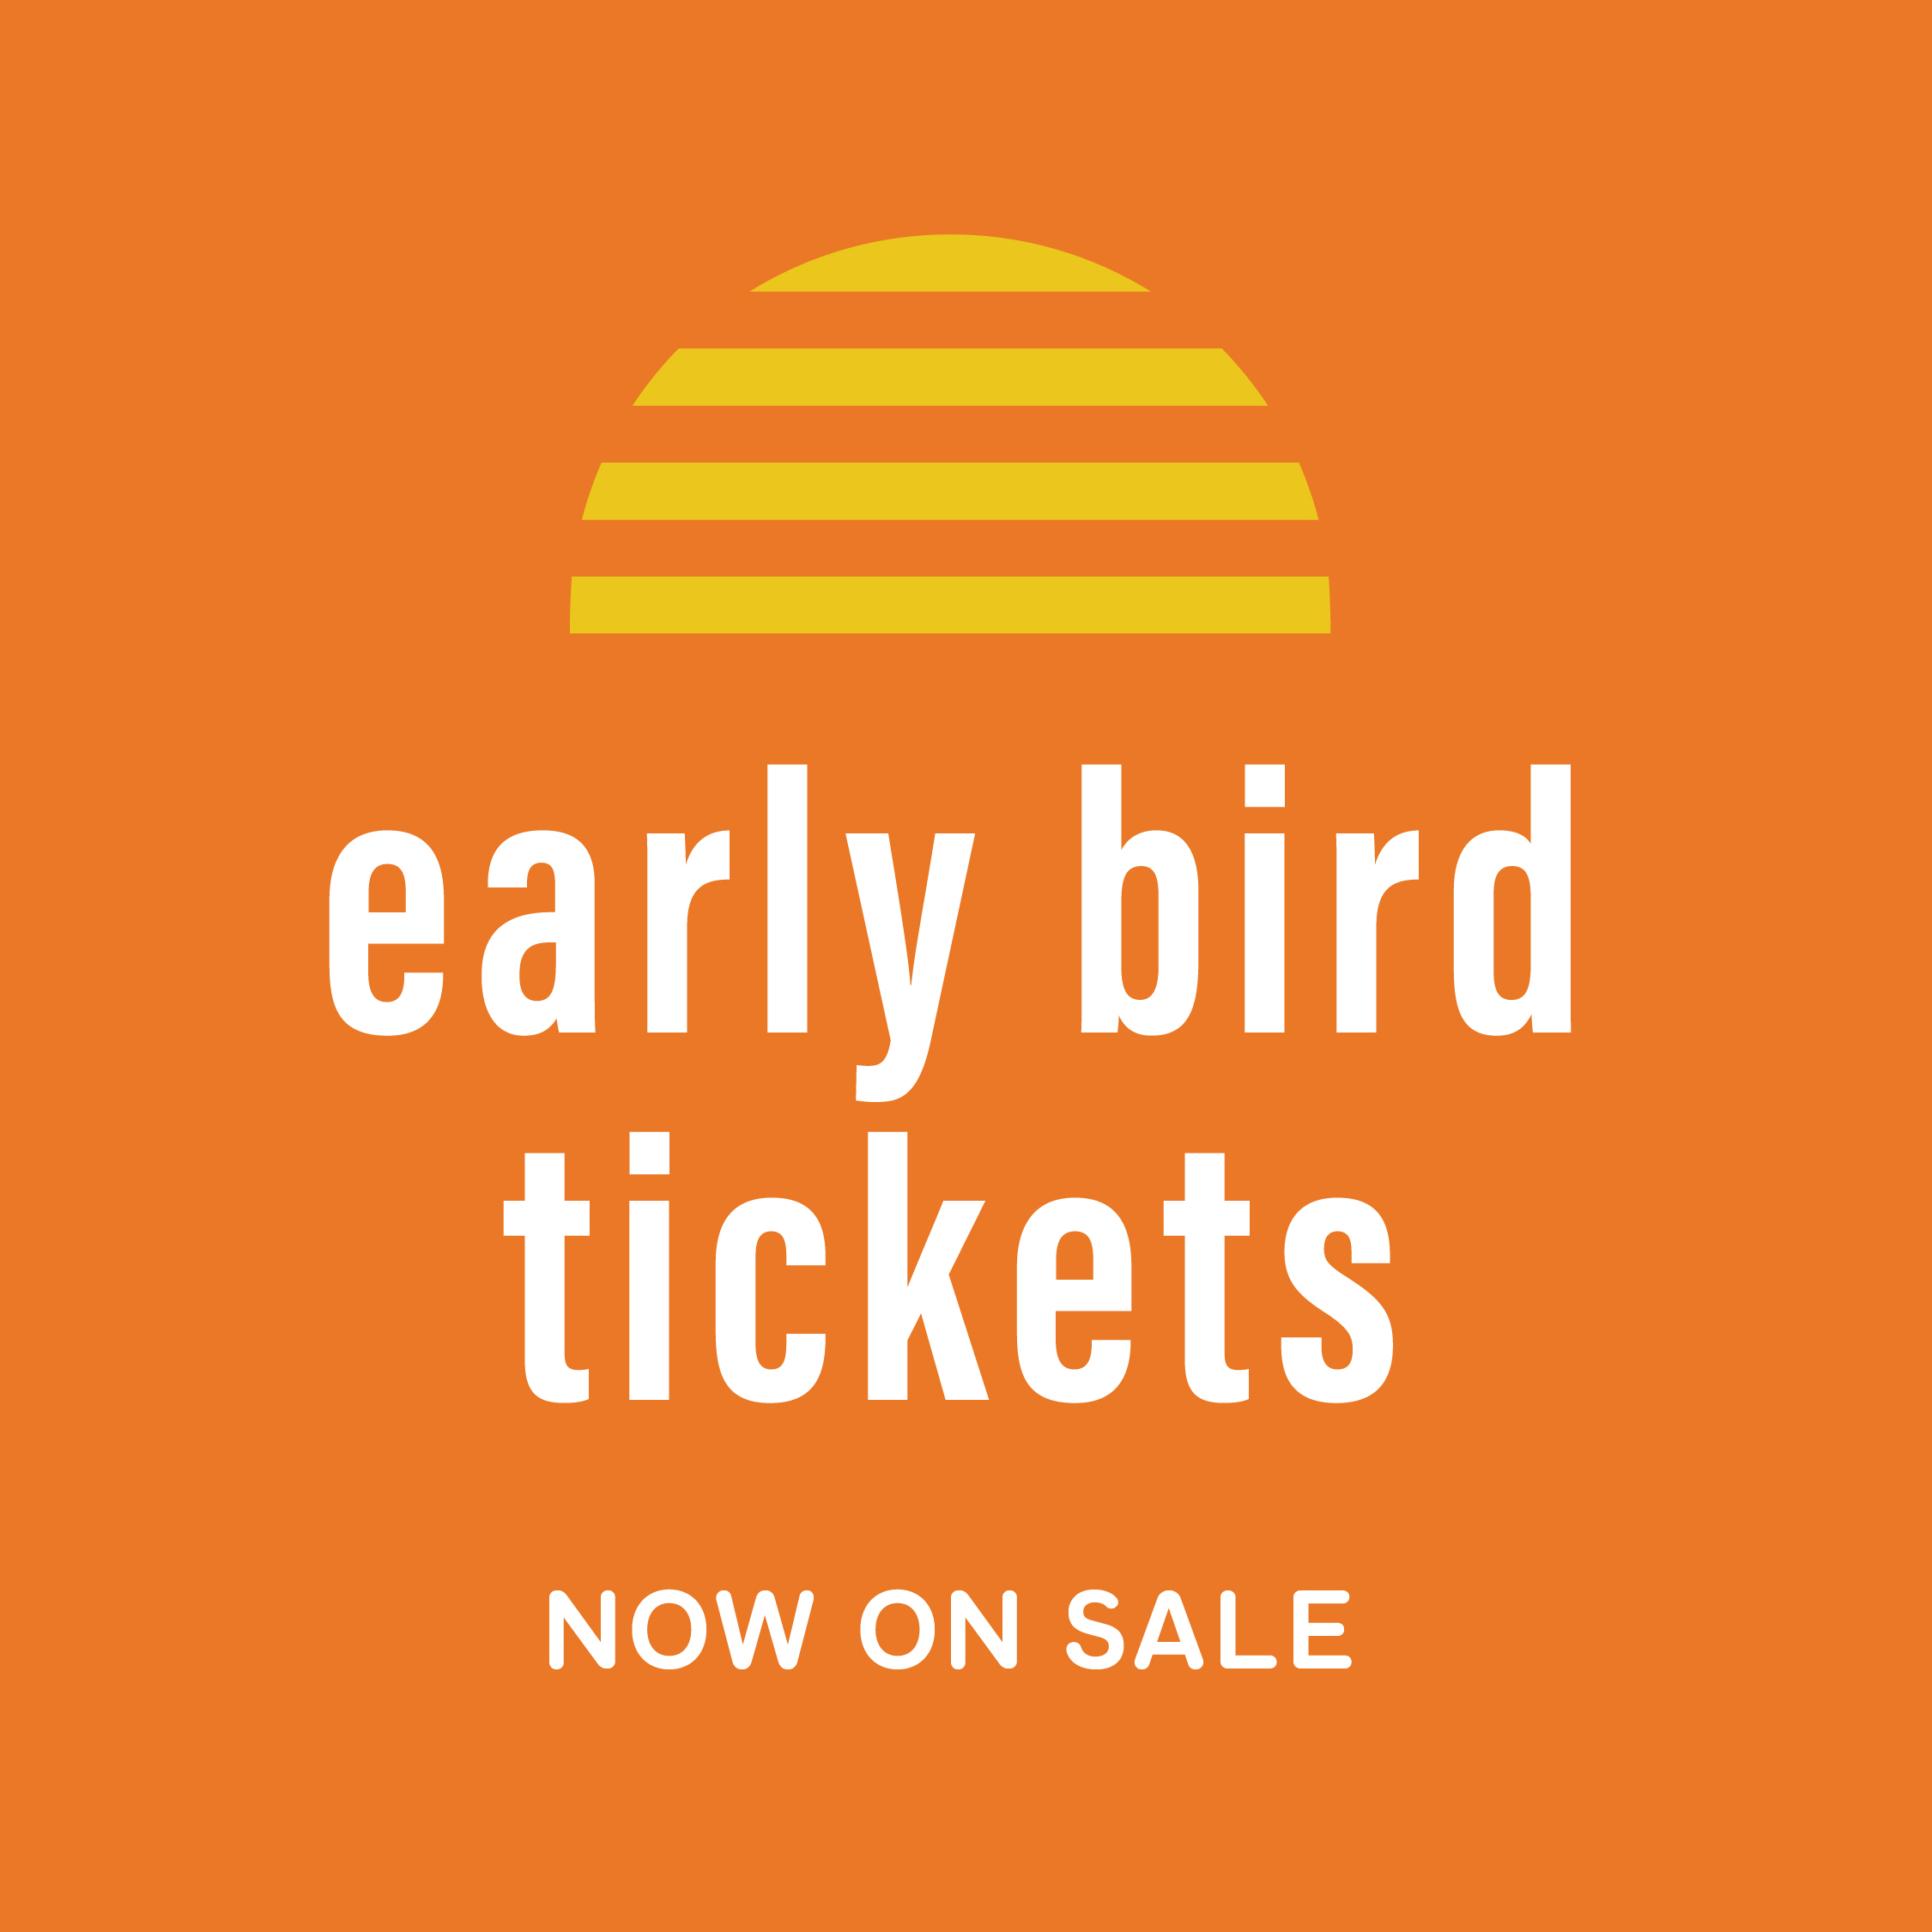 Early bird tickets now on sale